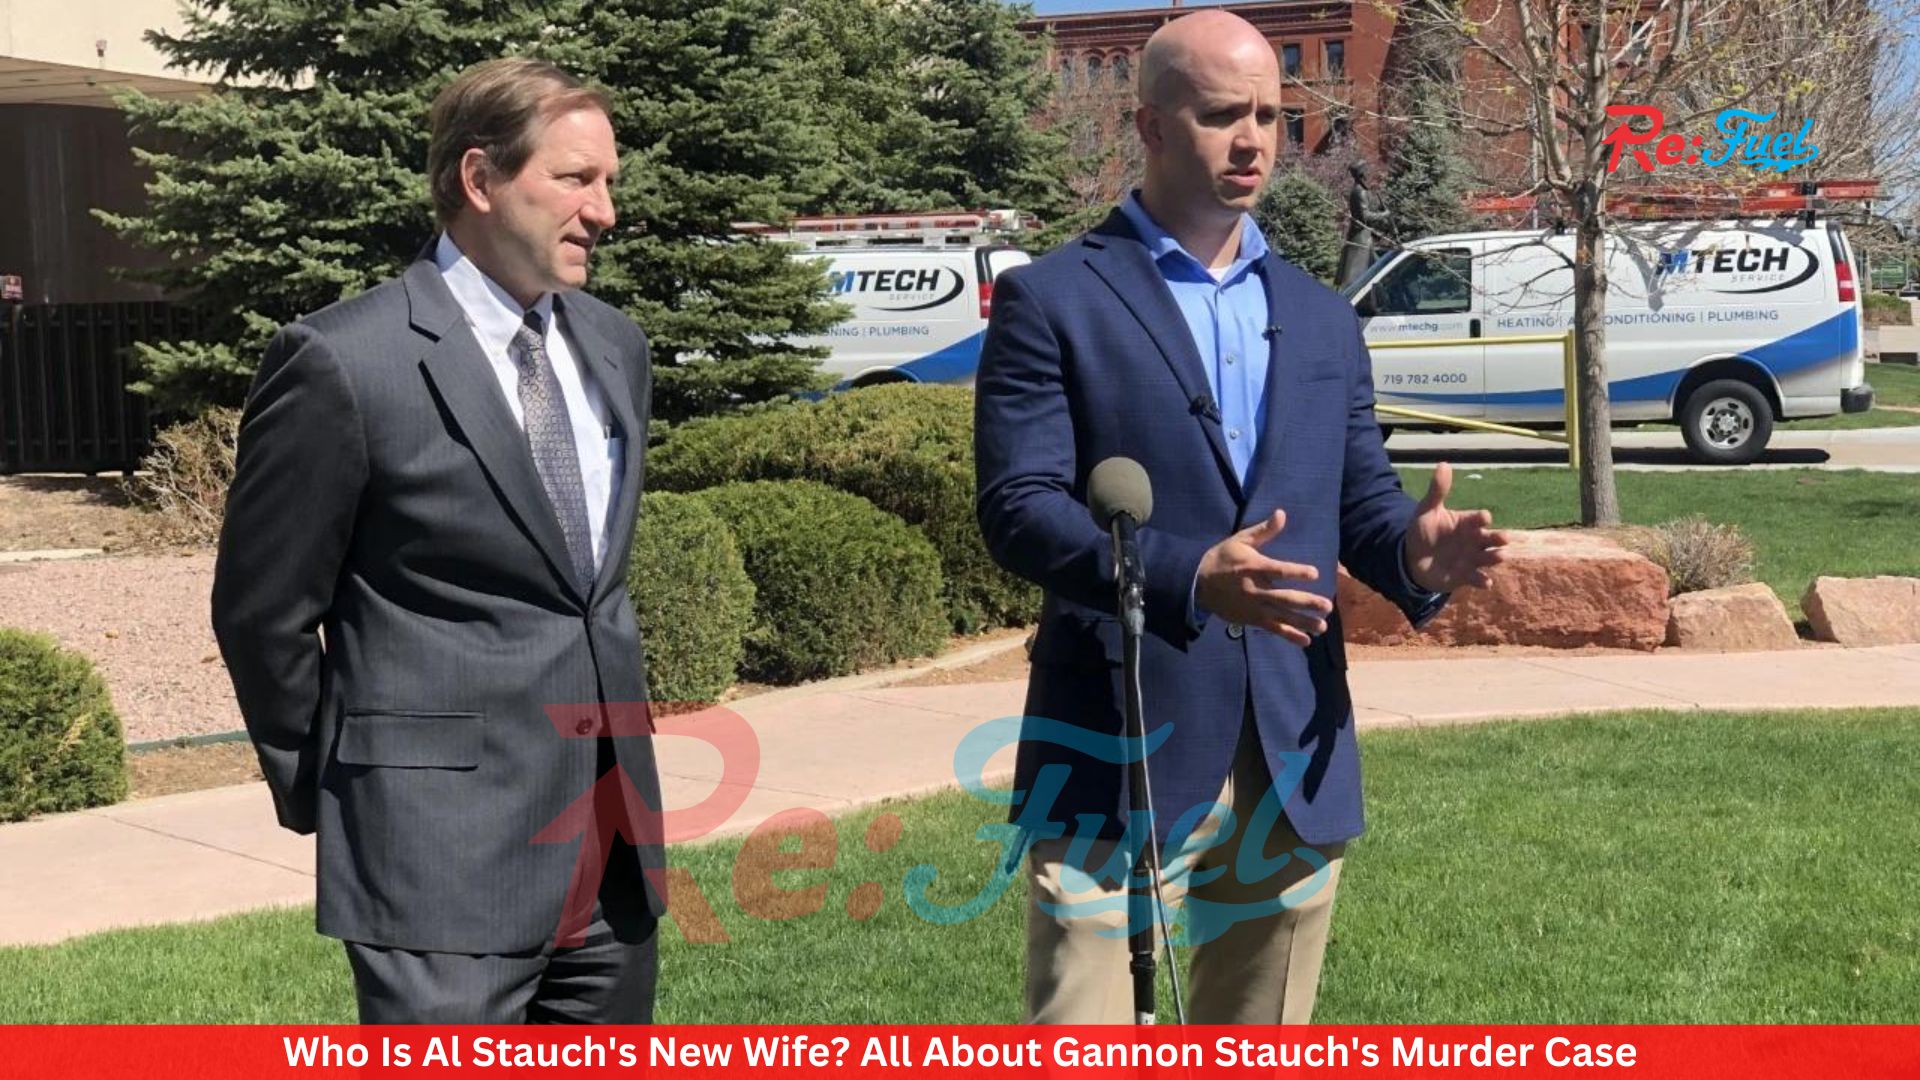 Who Is Al Stauch's New Wife? All About Gannon Stauch's Murder Case